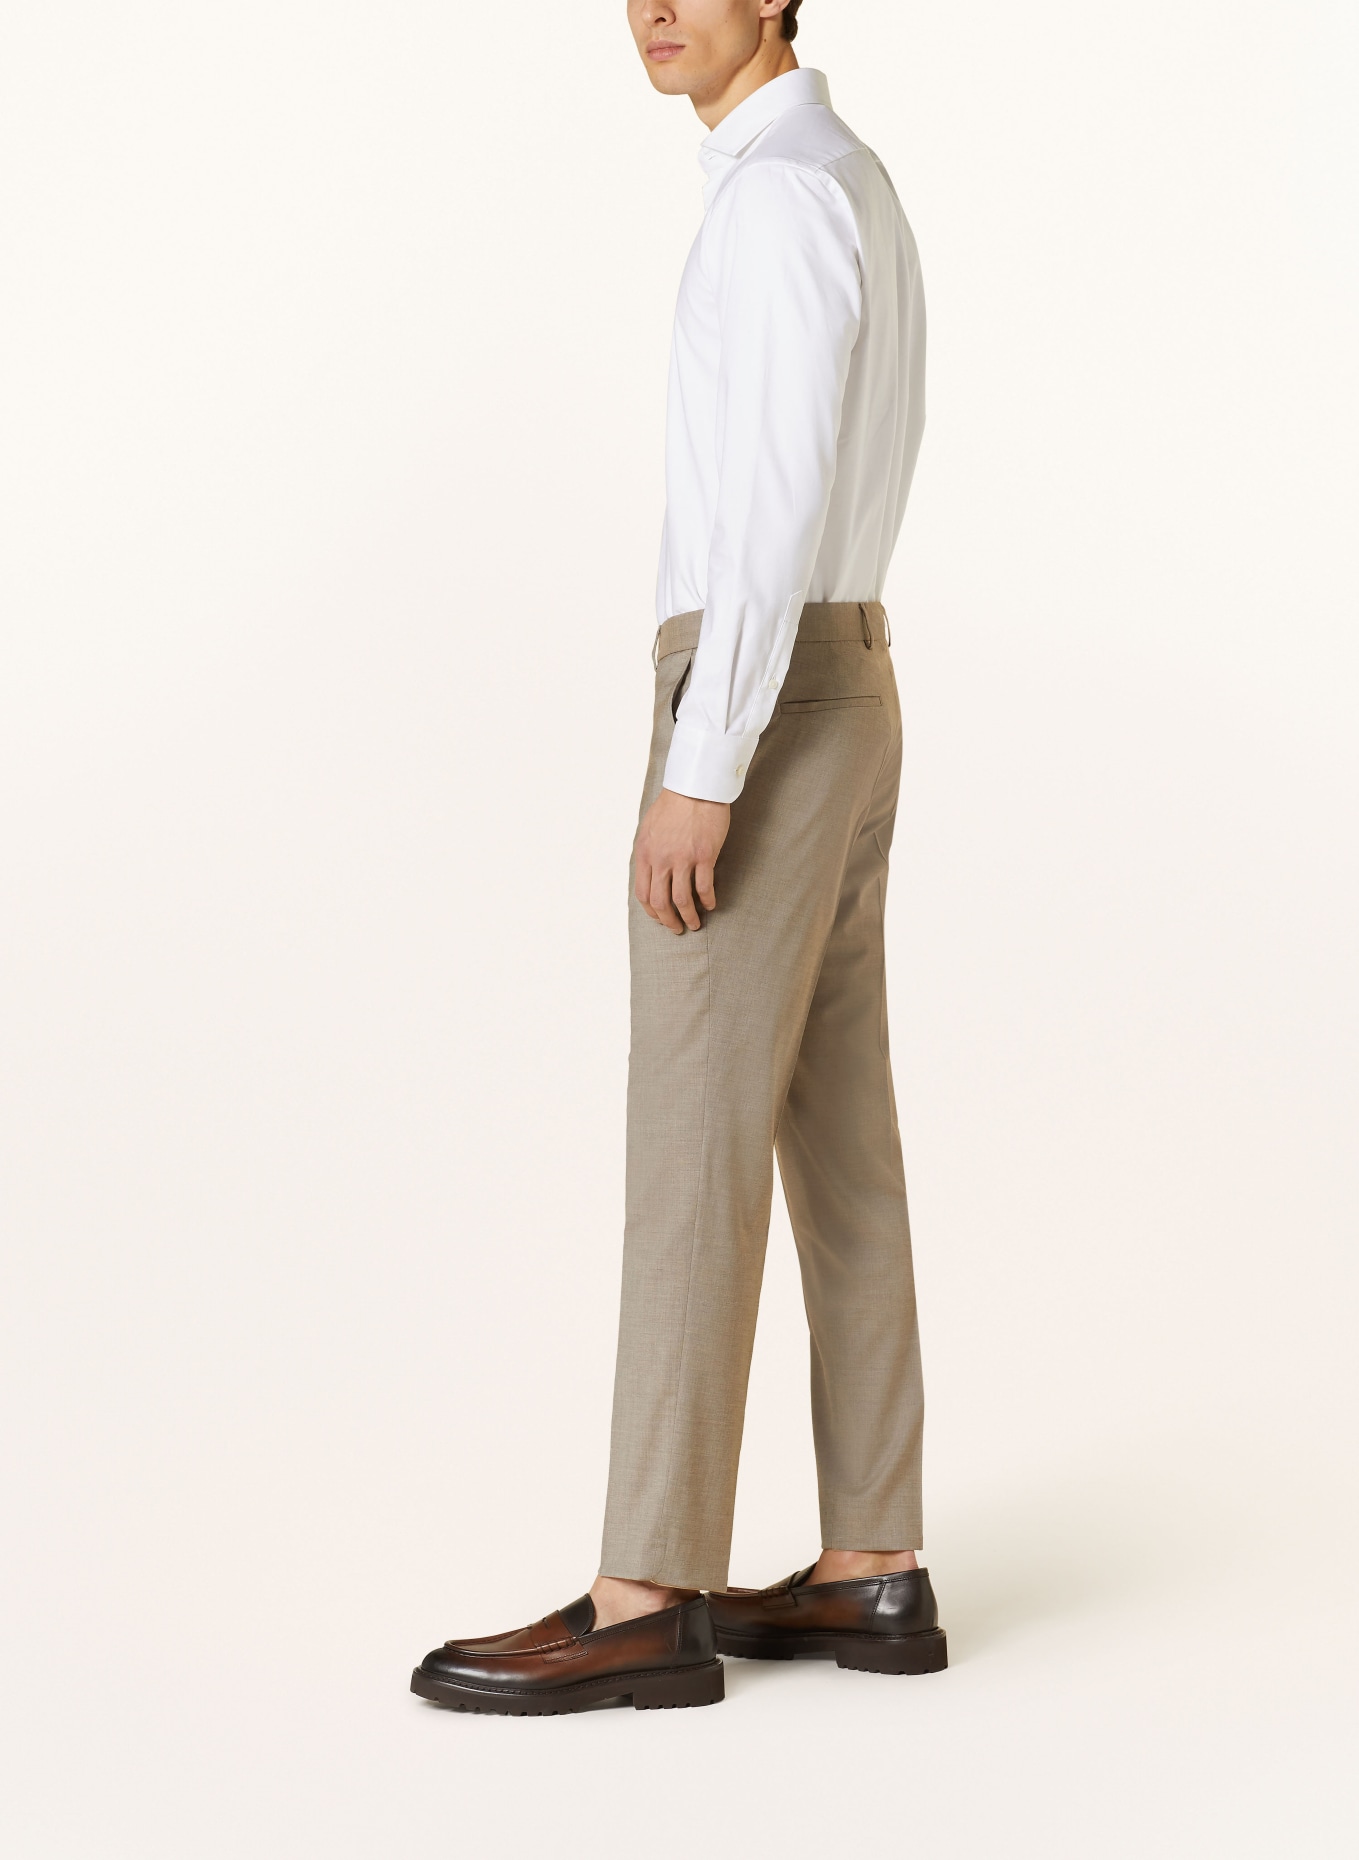 CG - CLUB of GENTS Suit trousers CG PACO slim fit, Color: 71 BRAUN HELL (Image 5)